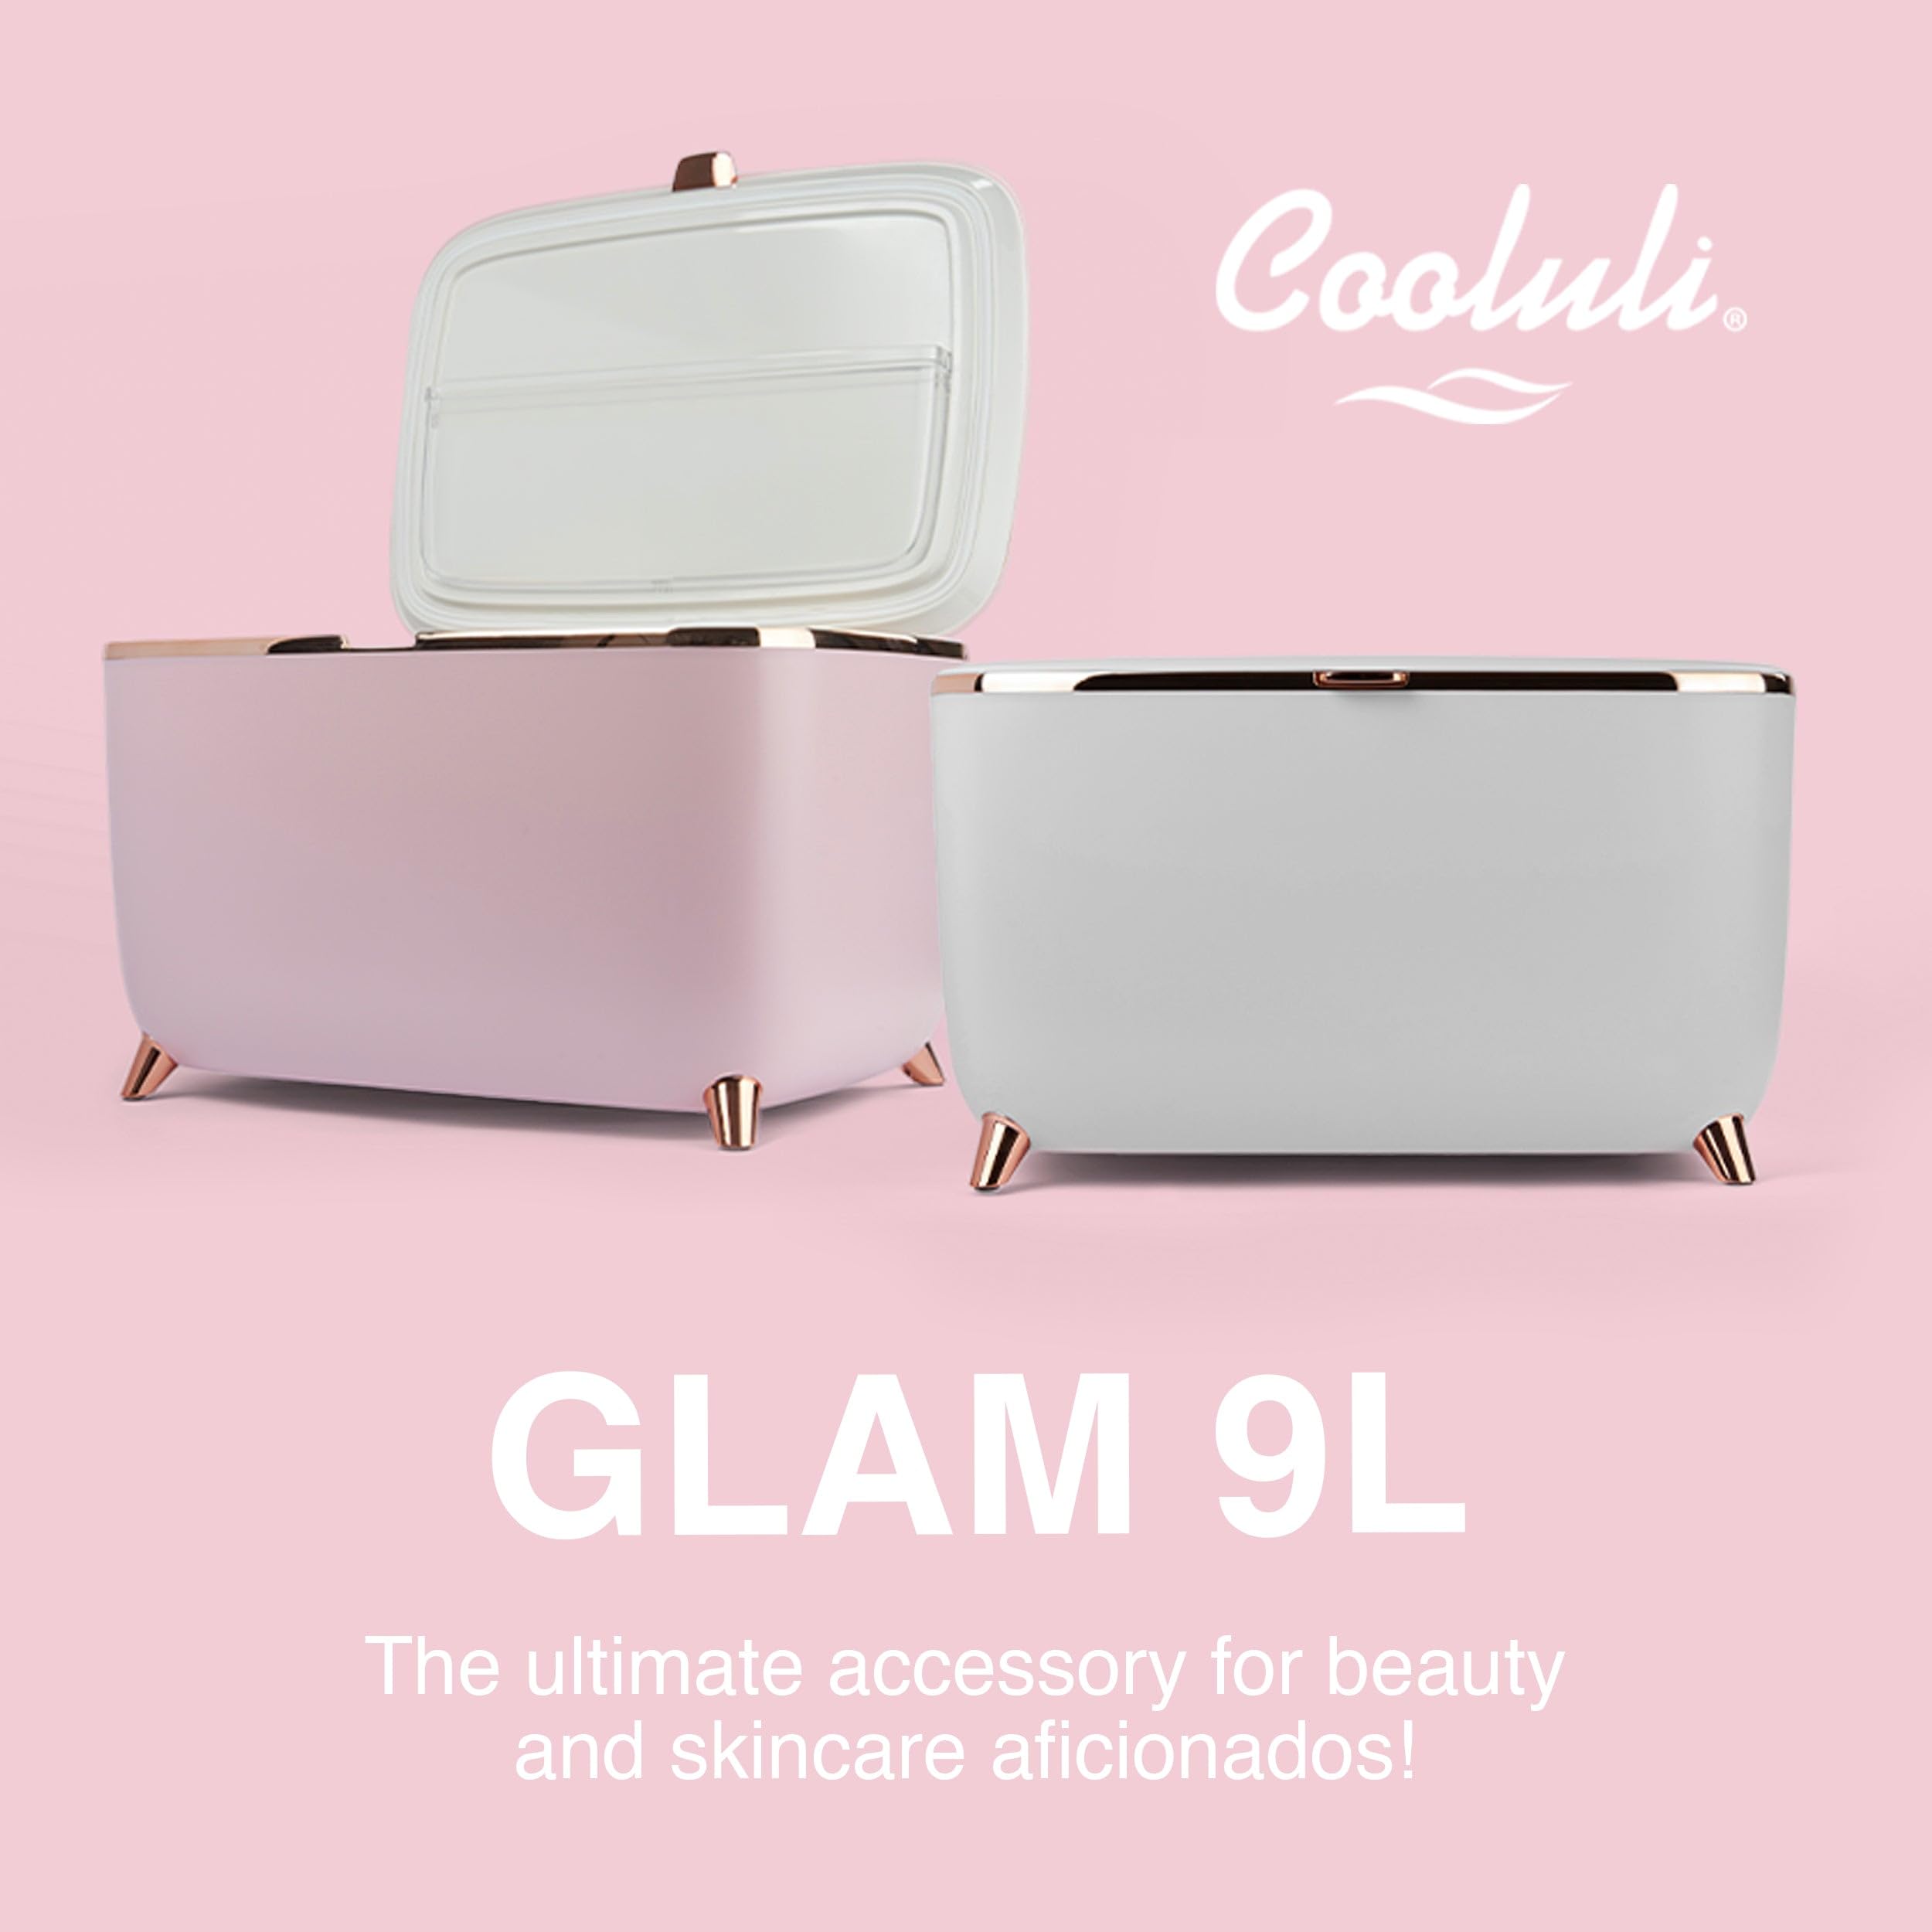 Cooluli Glam 9L Mini Skincare Fridge - White Mini Fridge for Skin Care Accessories, Makeup, Cosmetics and Facial Masks Storage - Ideal Birthday and Christmas Gift for Women and Teen Girls